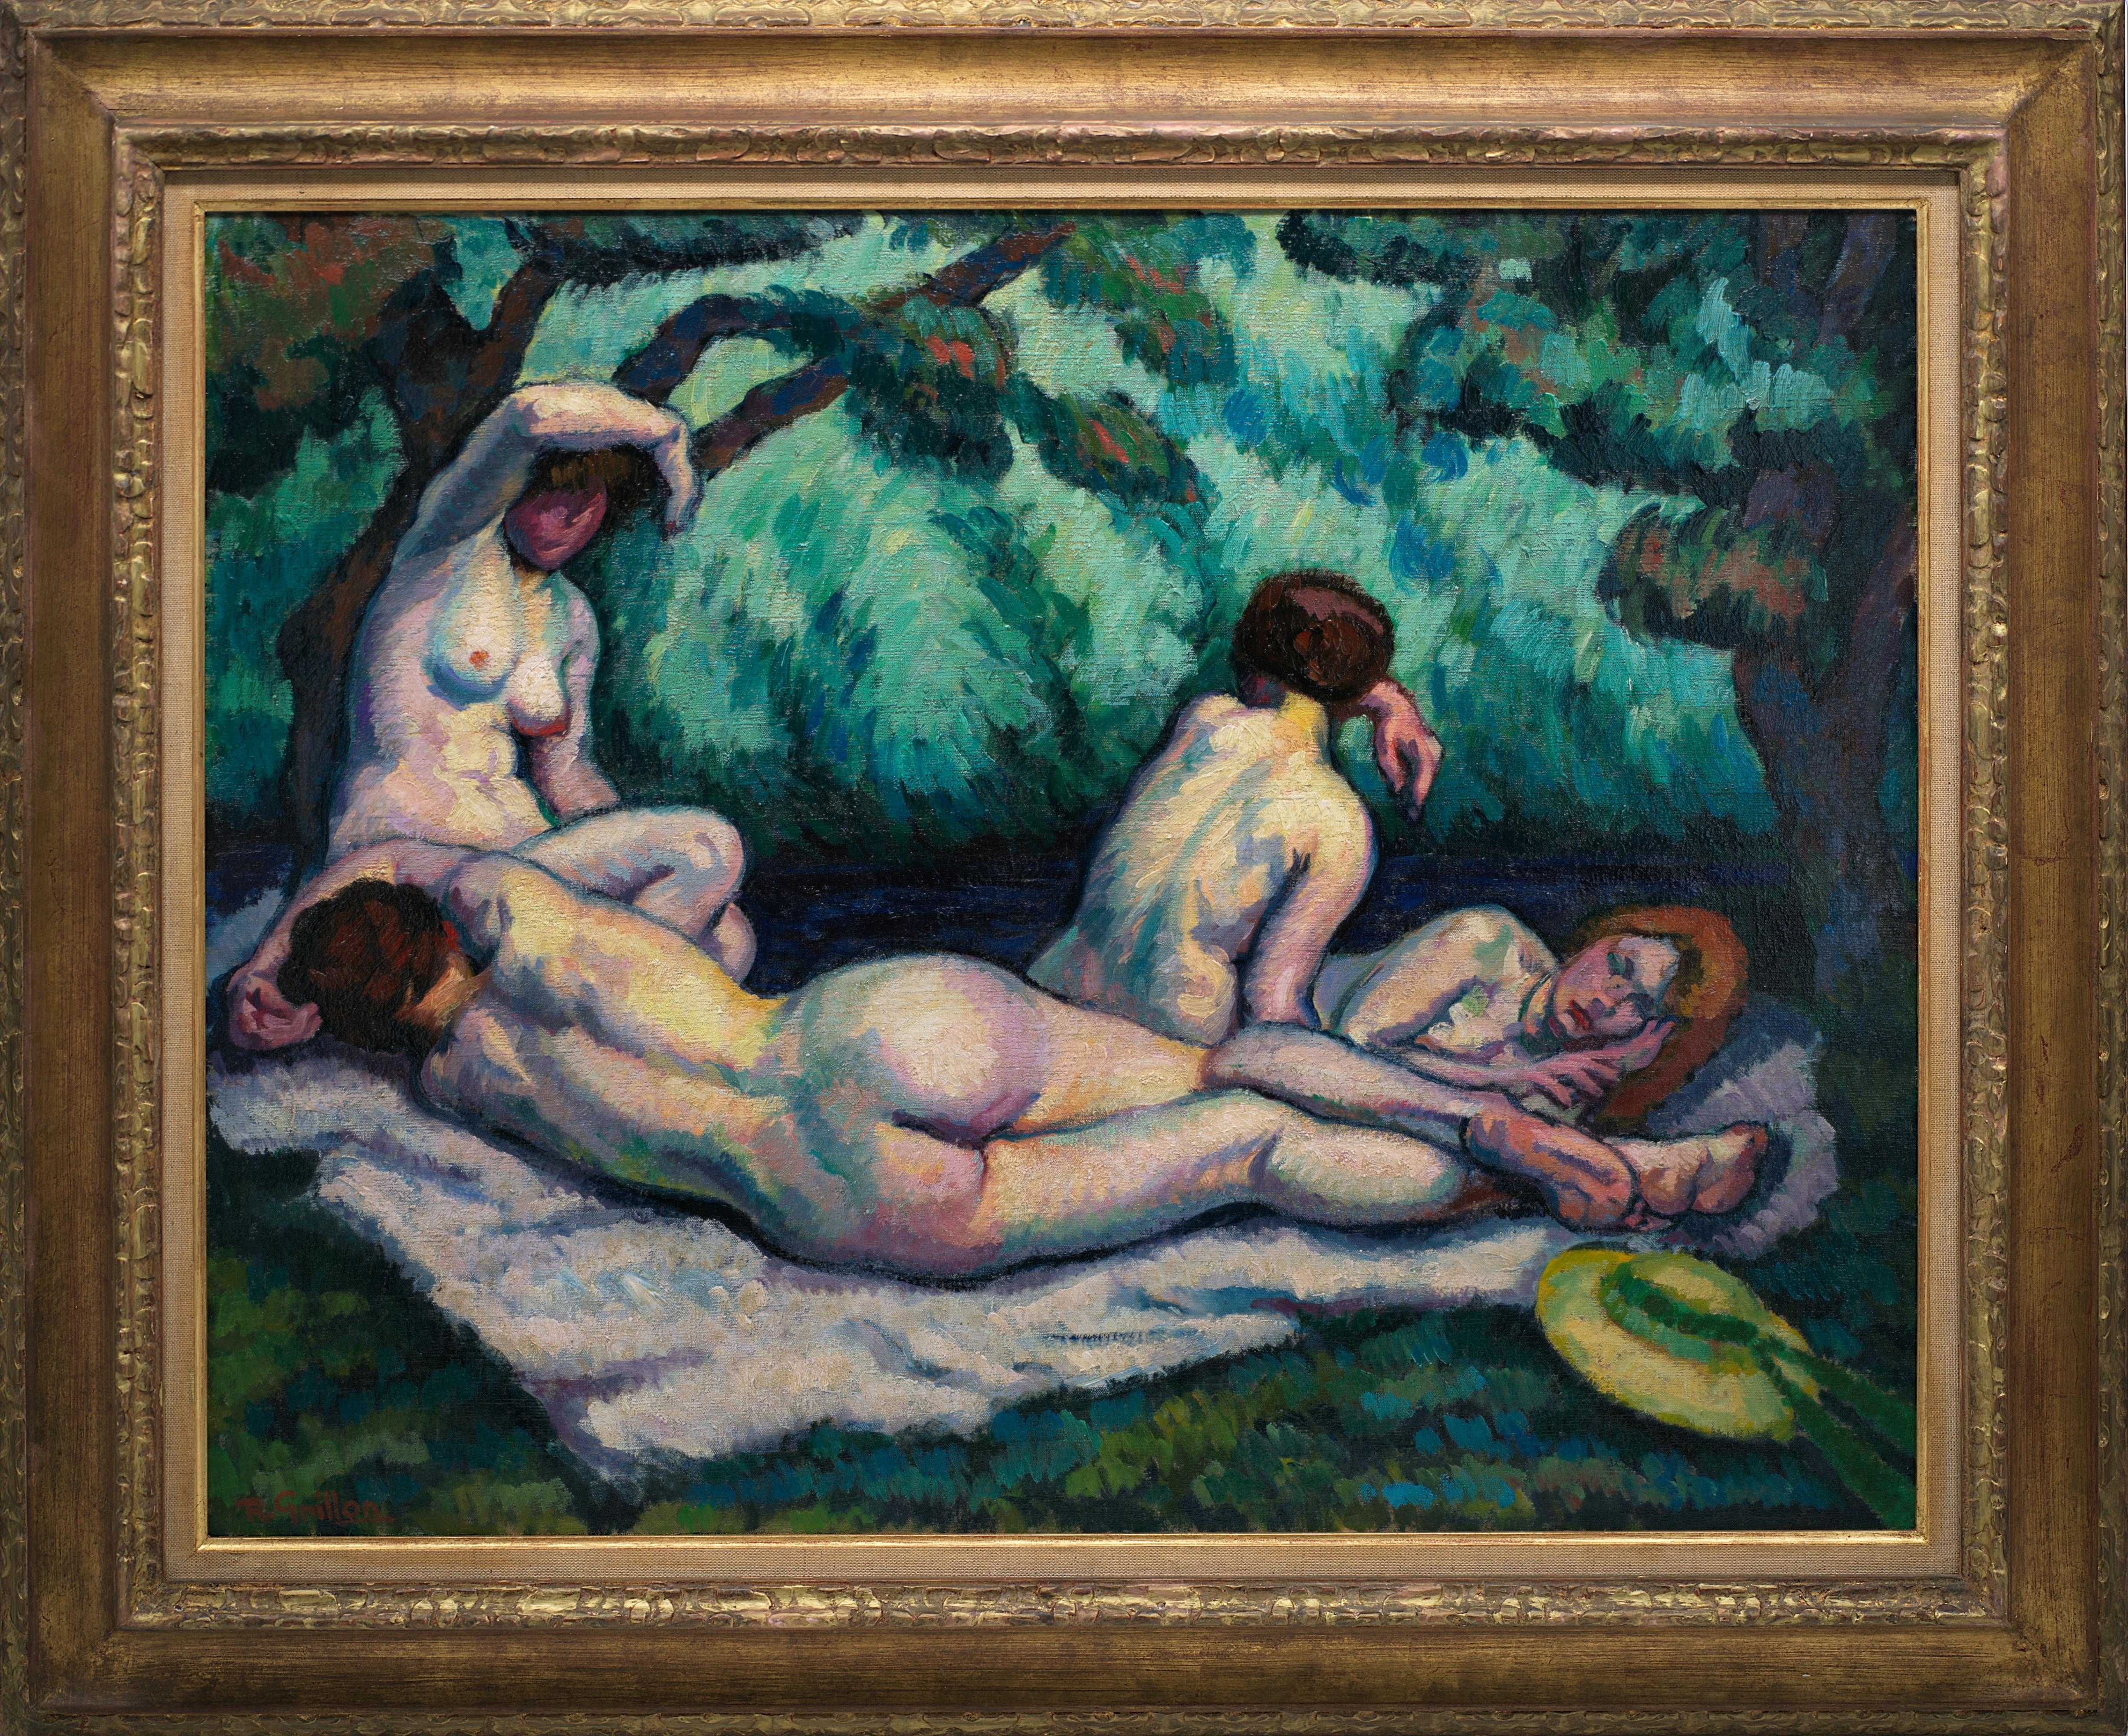 Nude Painting Roger Grillon - Baigneuses, huile sur toile, 1914